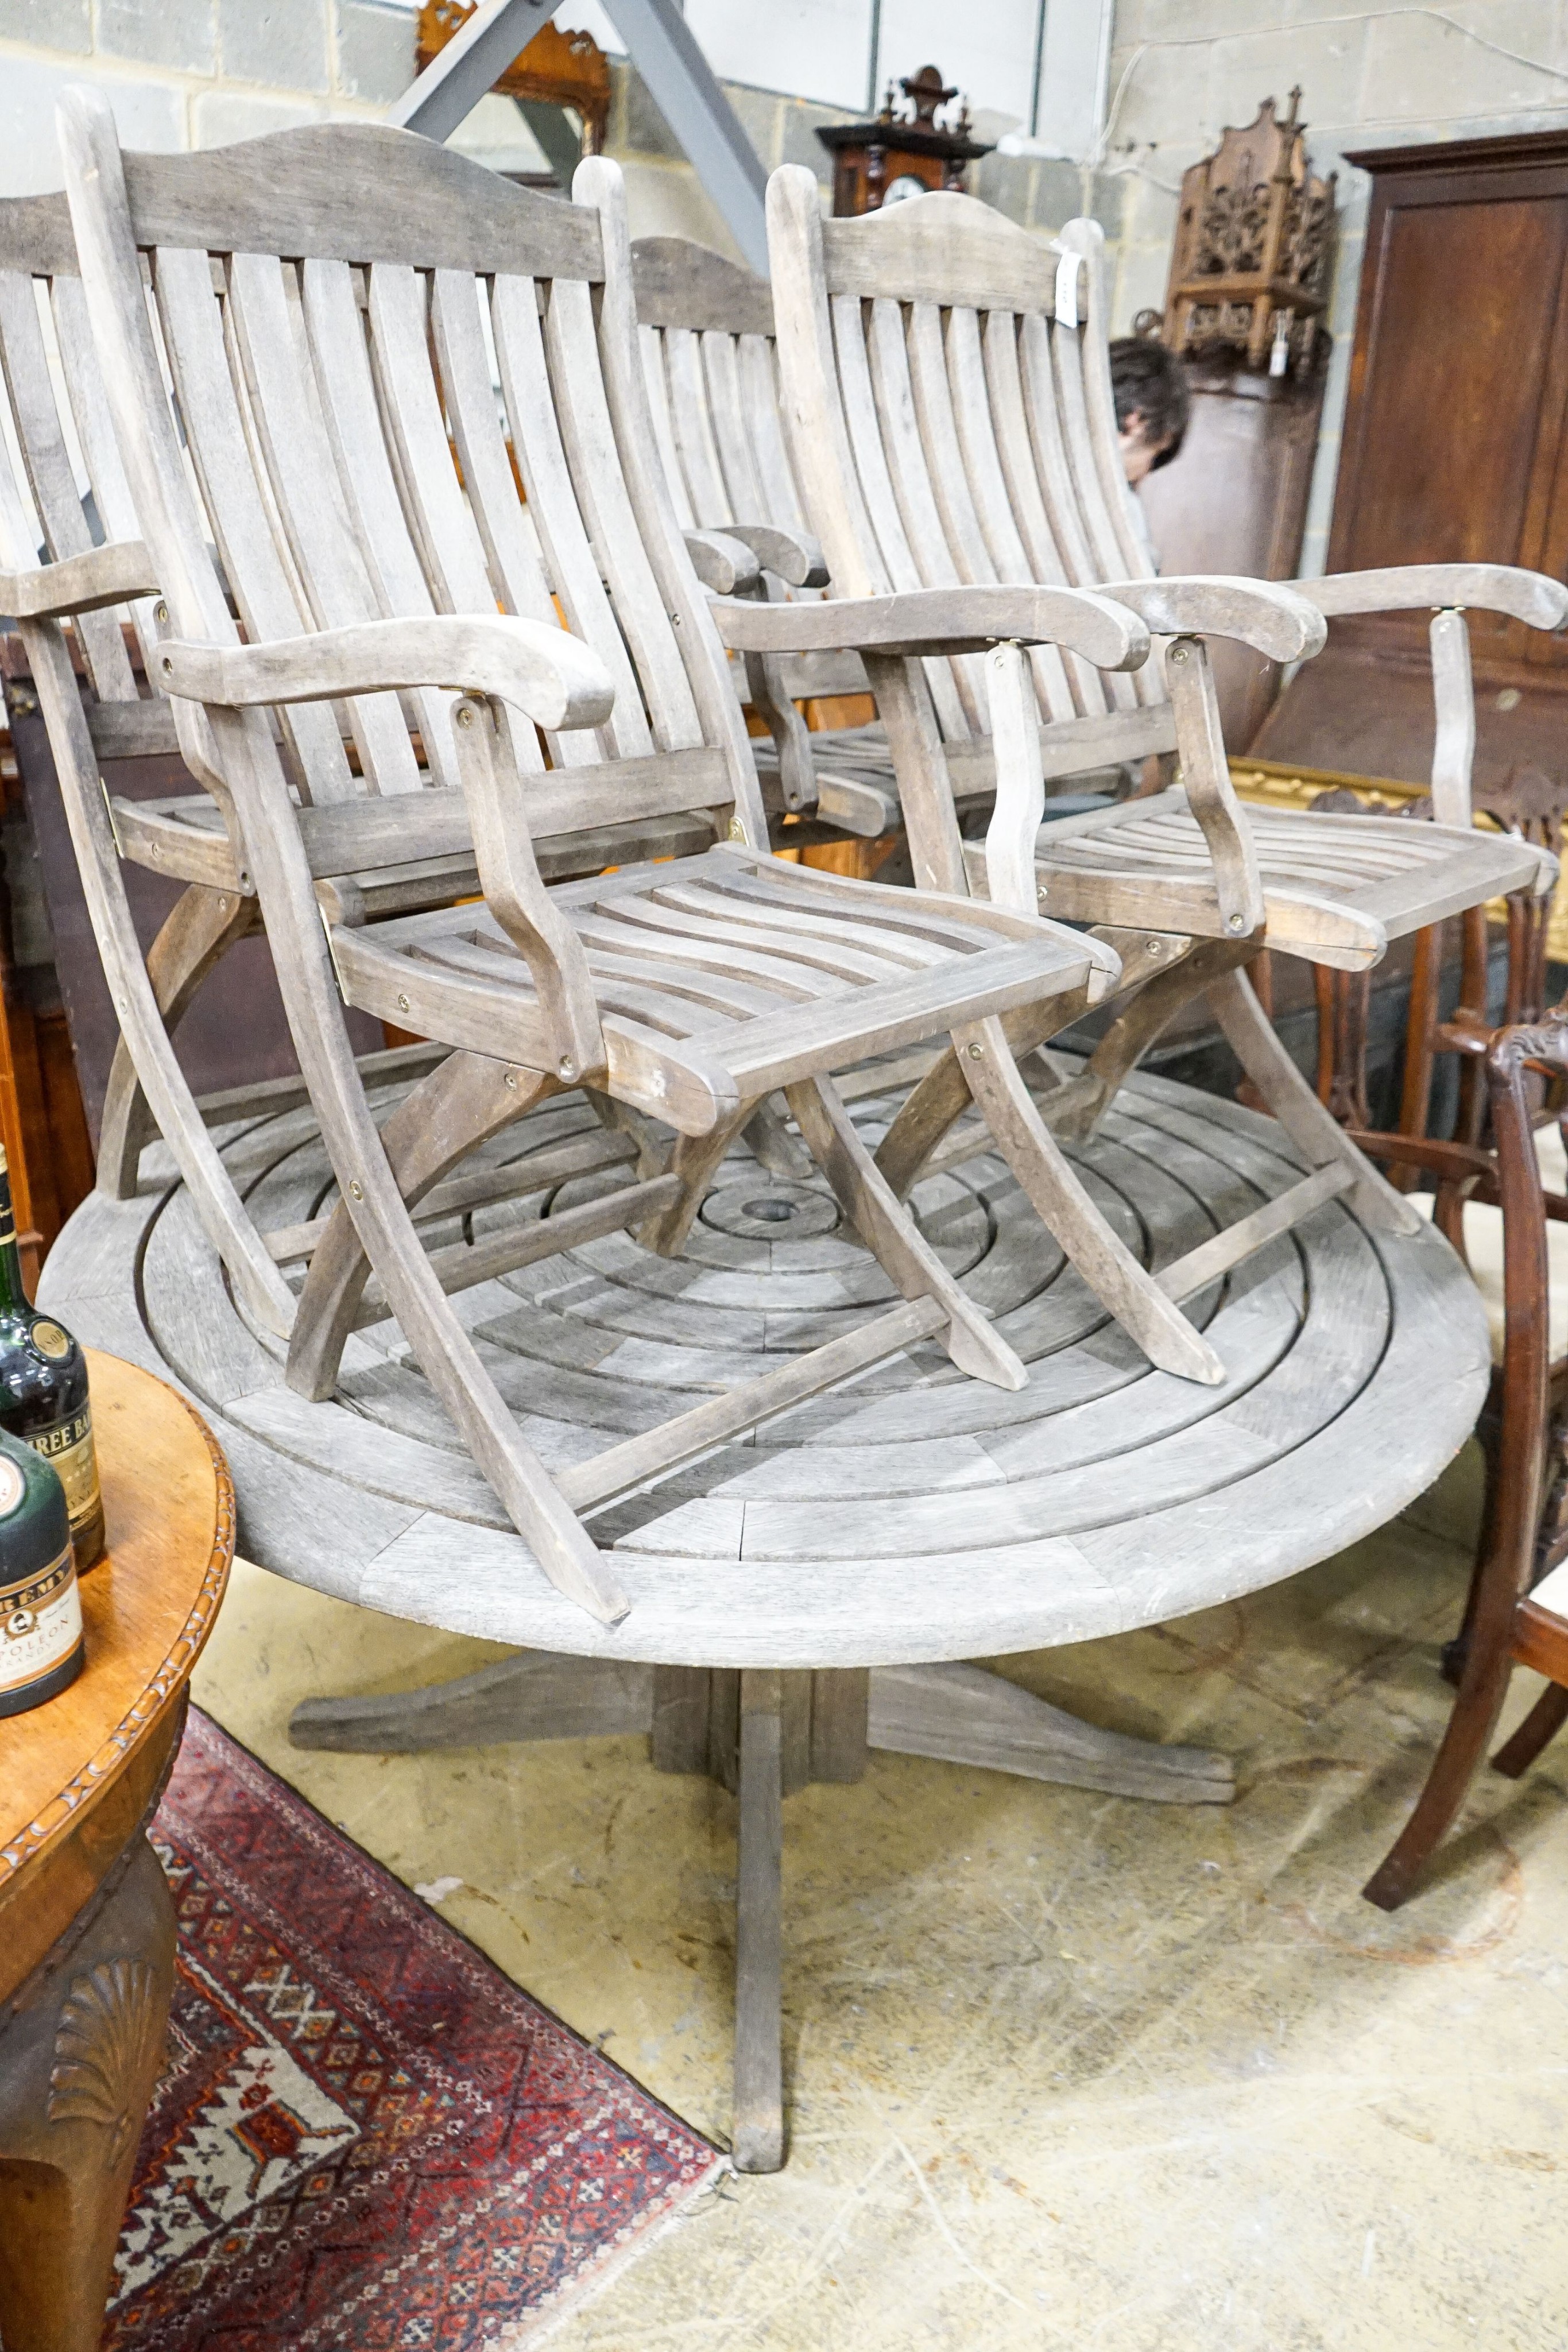 An Alexander Rose circular weathered teak garden table, diameter 144cm, height 71cm, (no bolts) and four Kent collection folding chairs